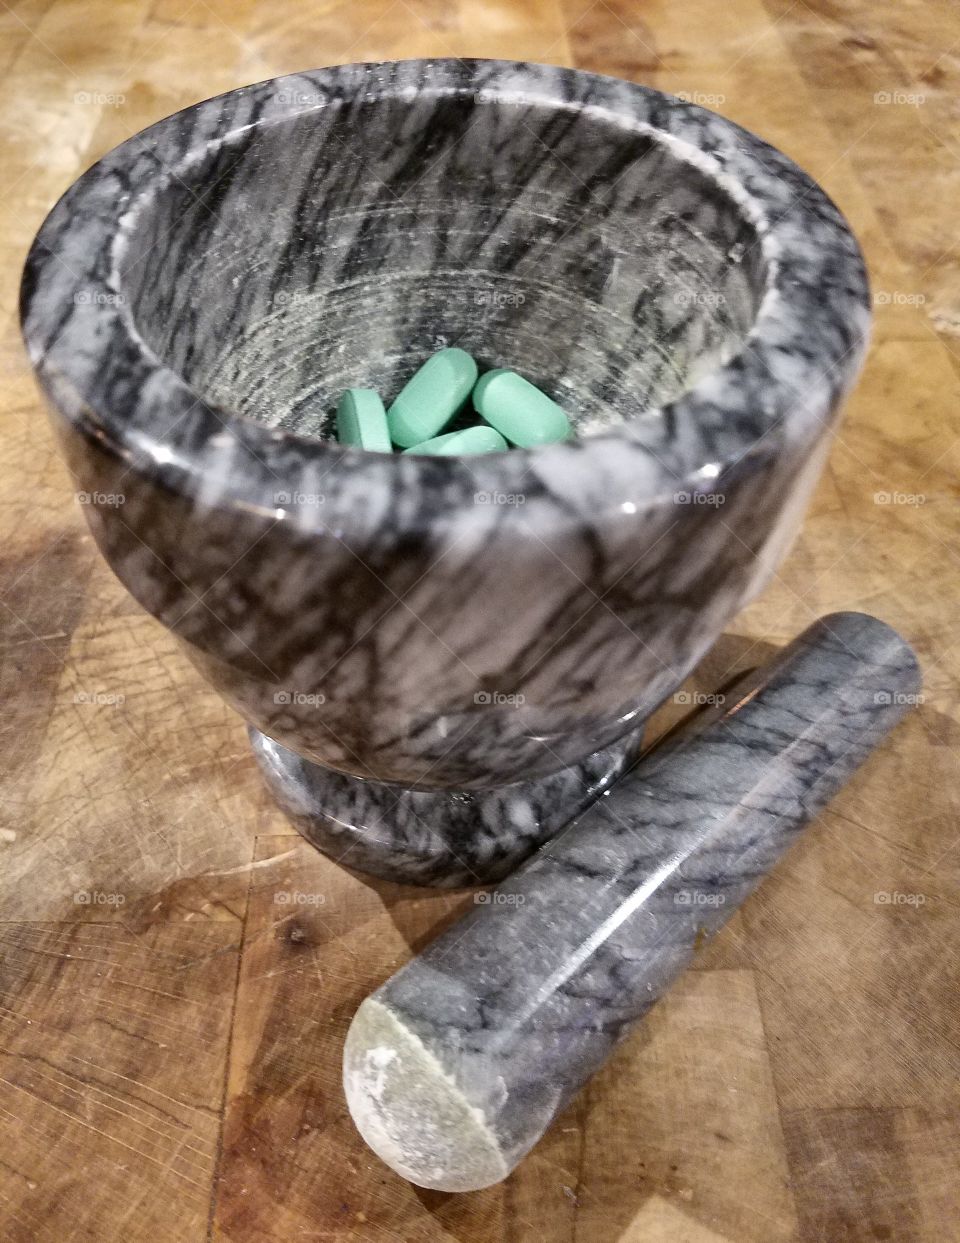 Mortar & Pestle for crushing pills, made of marble.